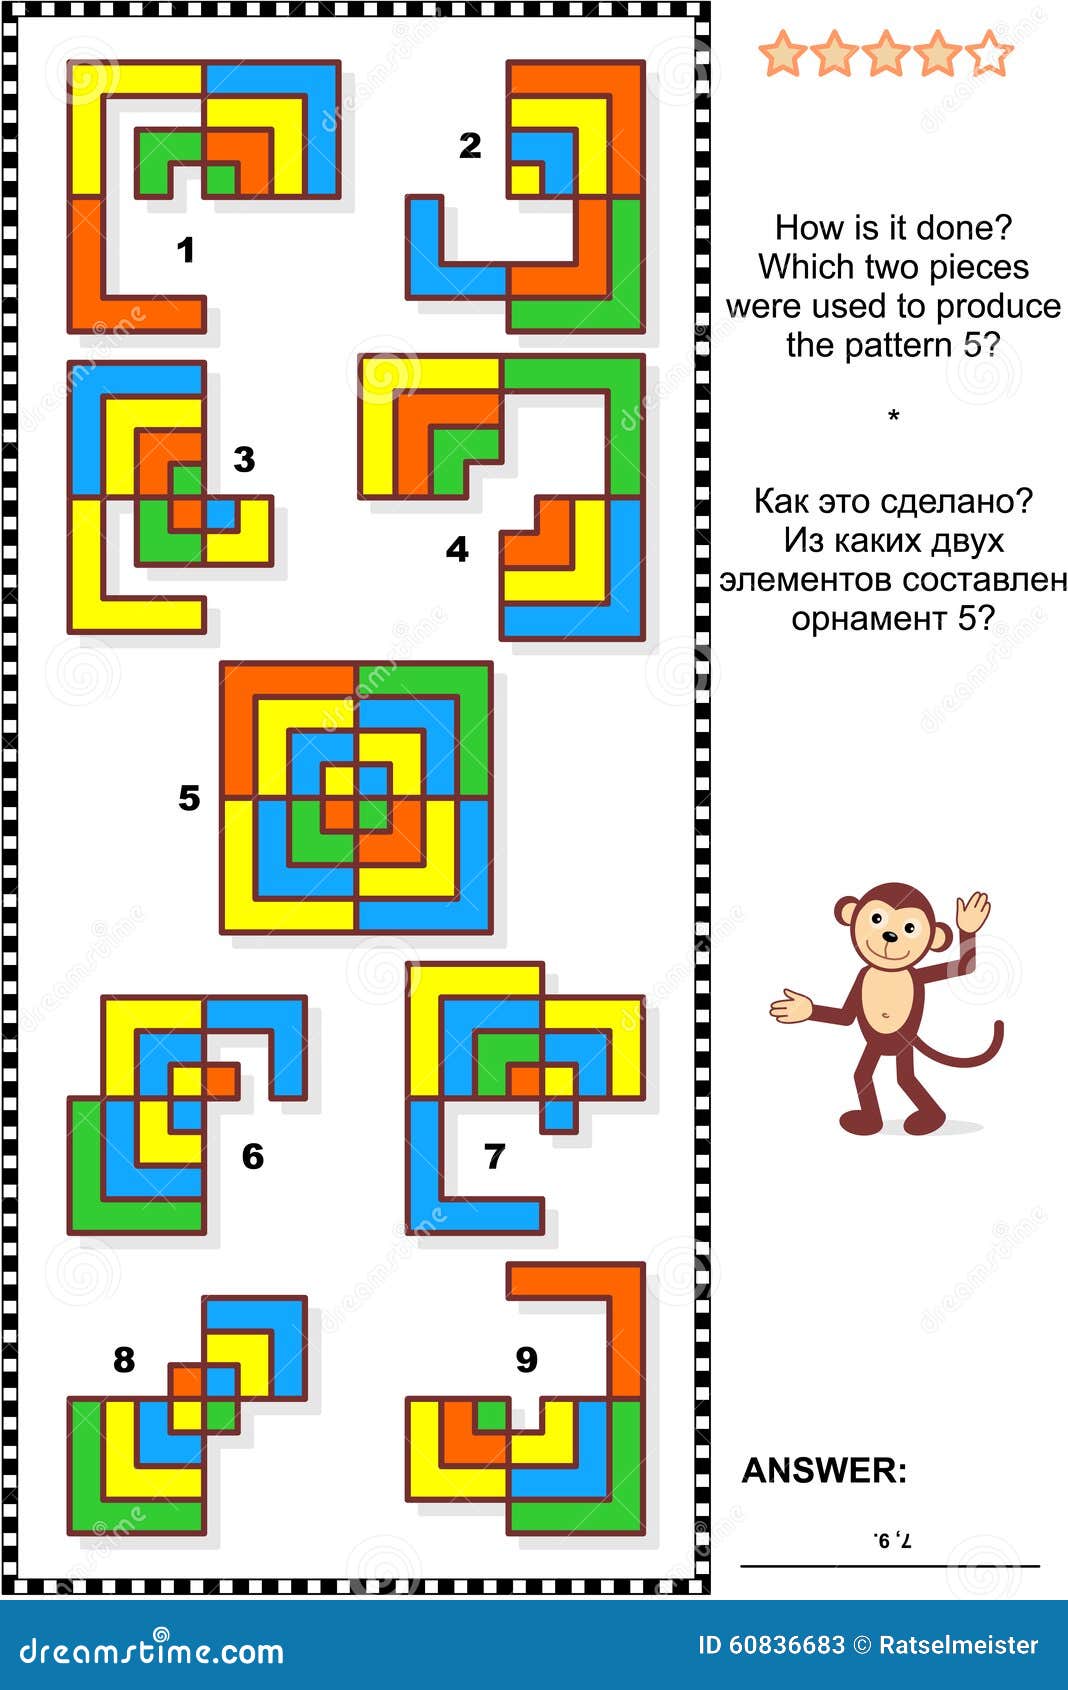 Abstract visual puzzle - how is it done?. IQ training abstract visual puzzle: How is it done? Which two pieces were used to produce the pattern 5? Answer included.